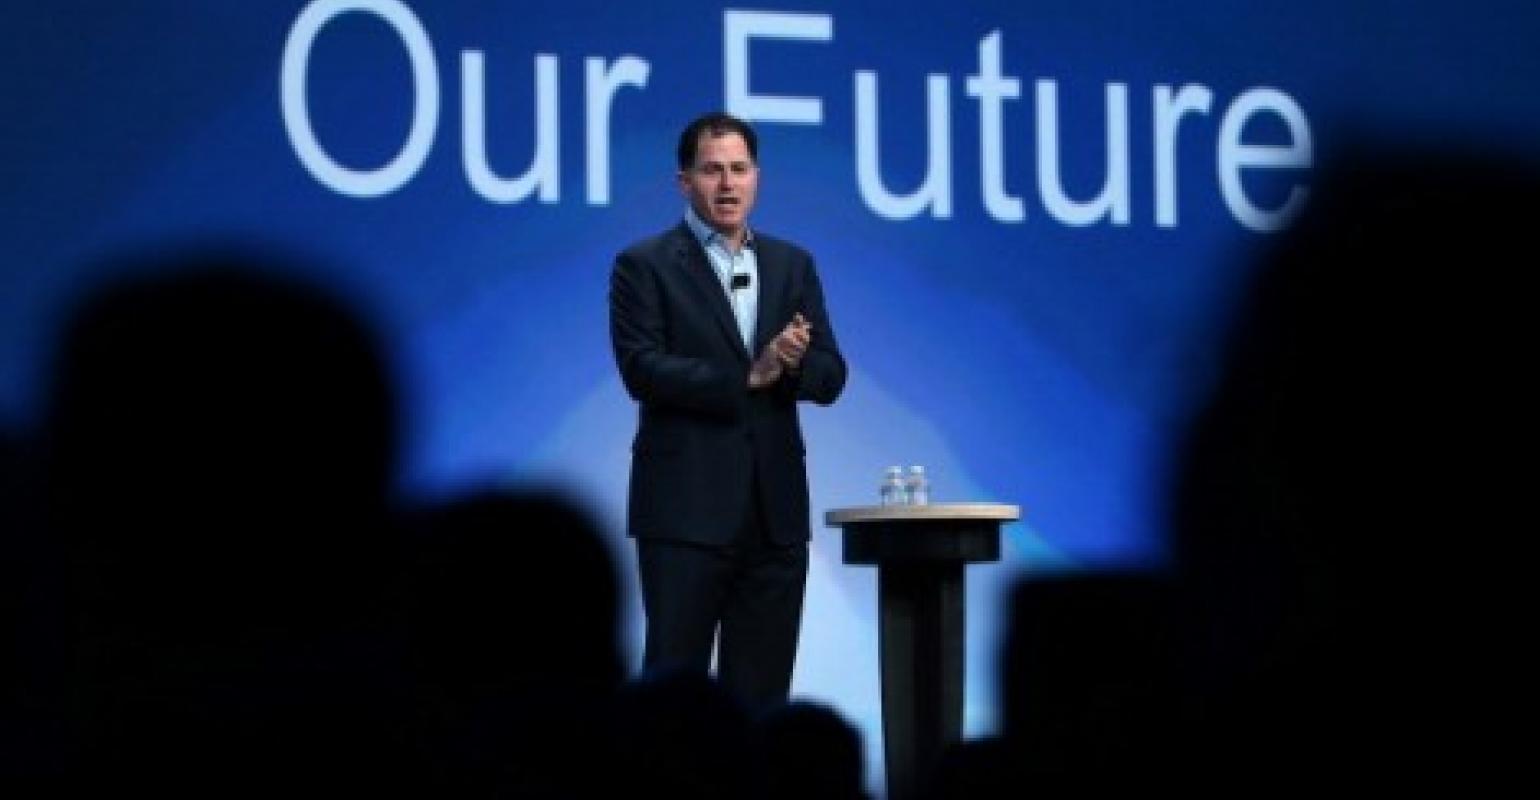 Report: Layoffs Underway at Dell Technologies | Data Center Knowledge |  News and analysis for the data center industry